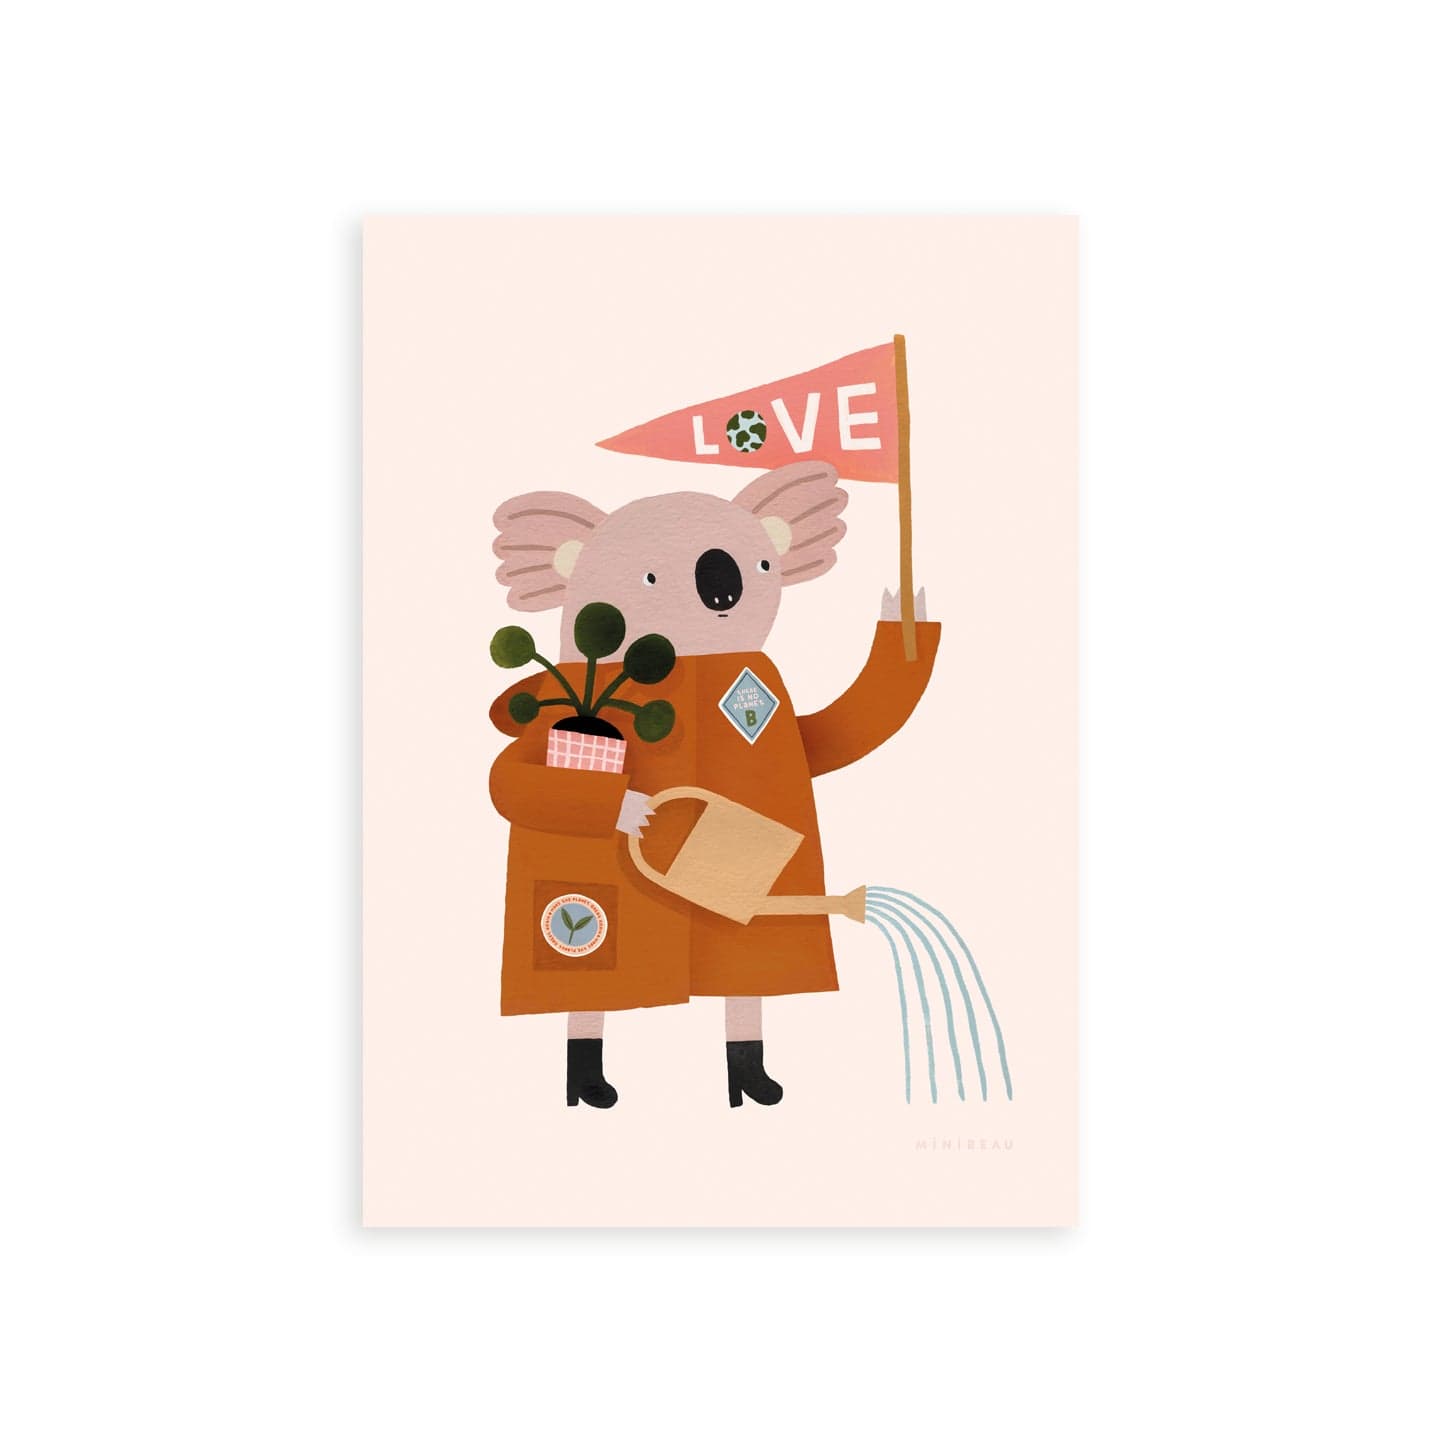 Our Love Our Planet Koala Art Print shows a koala standing tall in a long coat with patch badges on it. Holding a watering can, a plant and a pink triangle flag with the word LOVE on it, with the O being the planet Earth